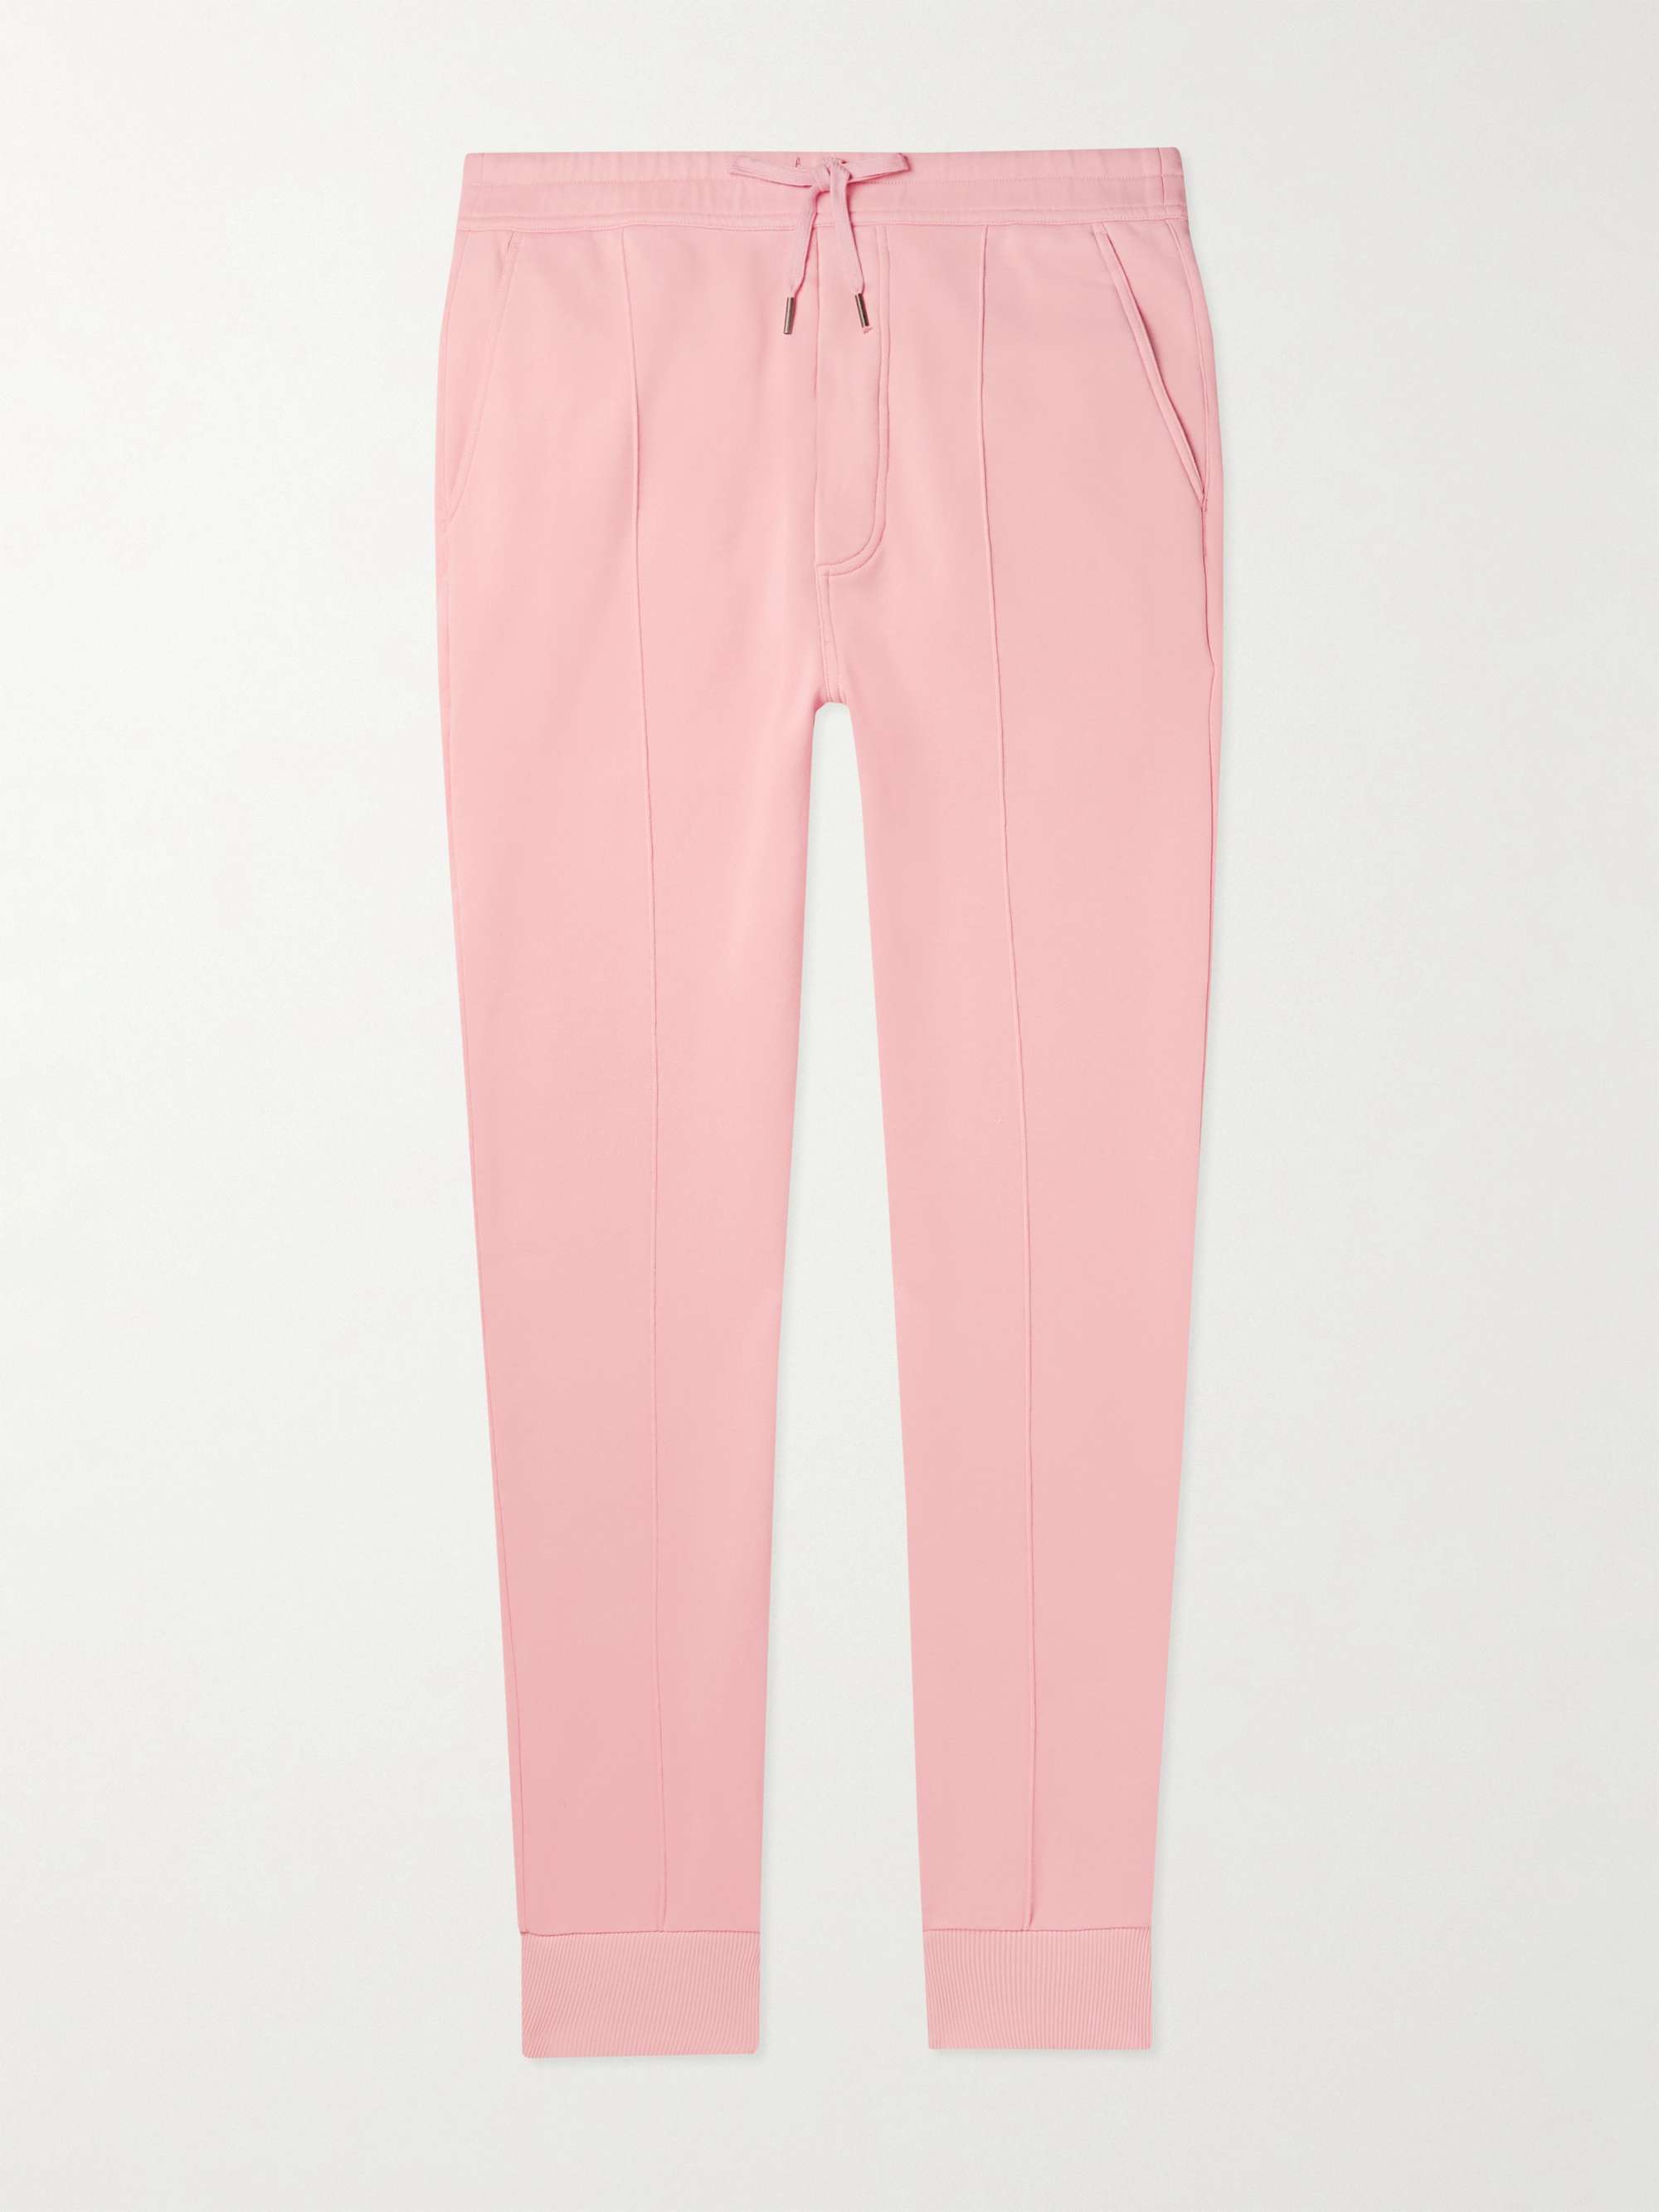 TOM FORD Tapered Jersey Sweatpants